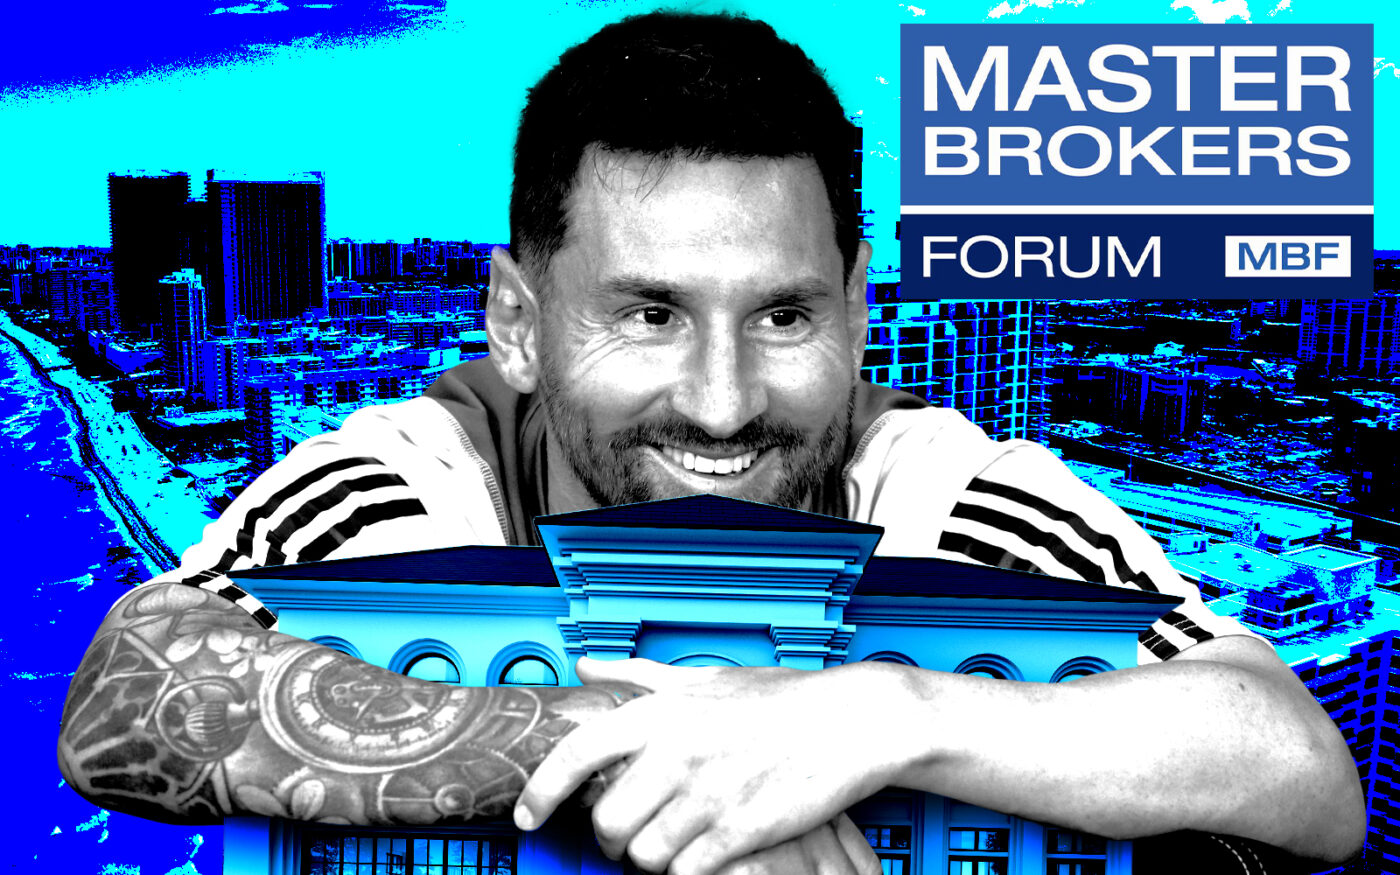 A photo illustration of Lionel Messi (Getty, Master Brokers Forum)